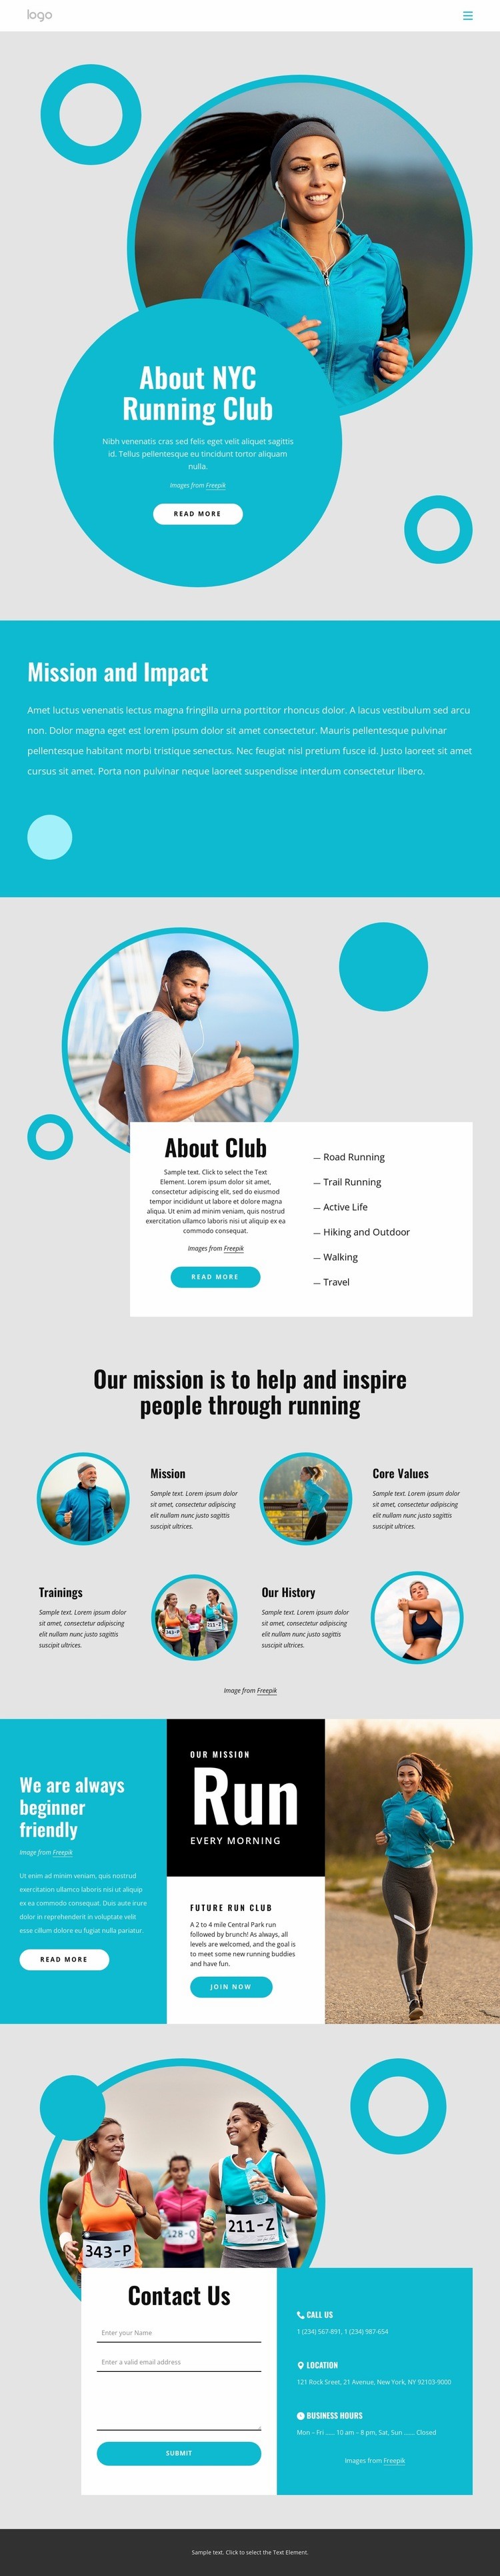 About NYC running club Webflow Template Alternative